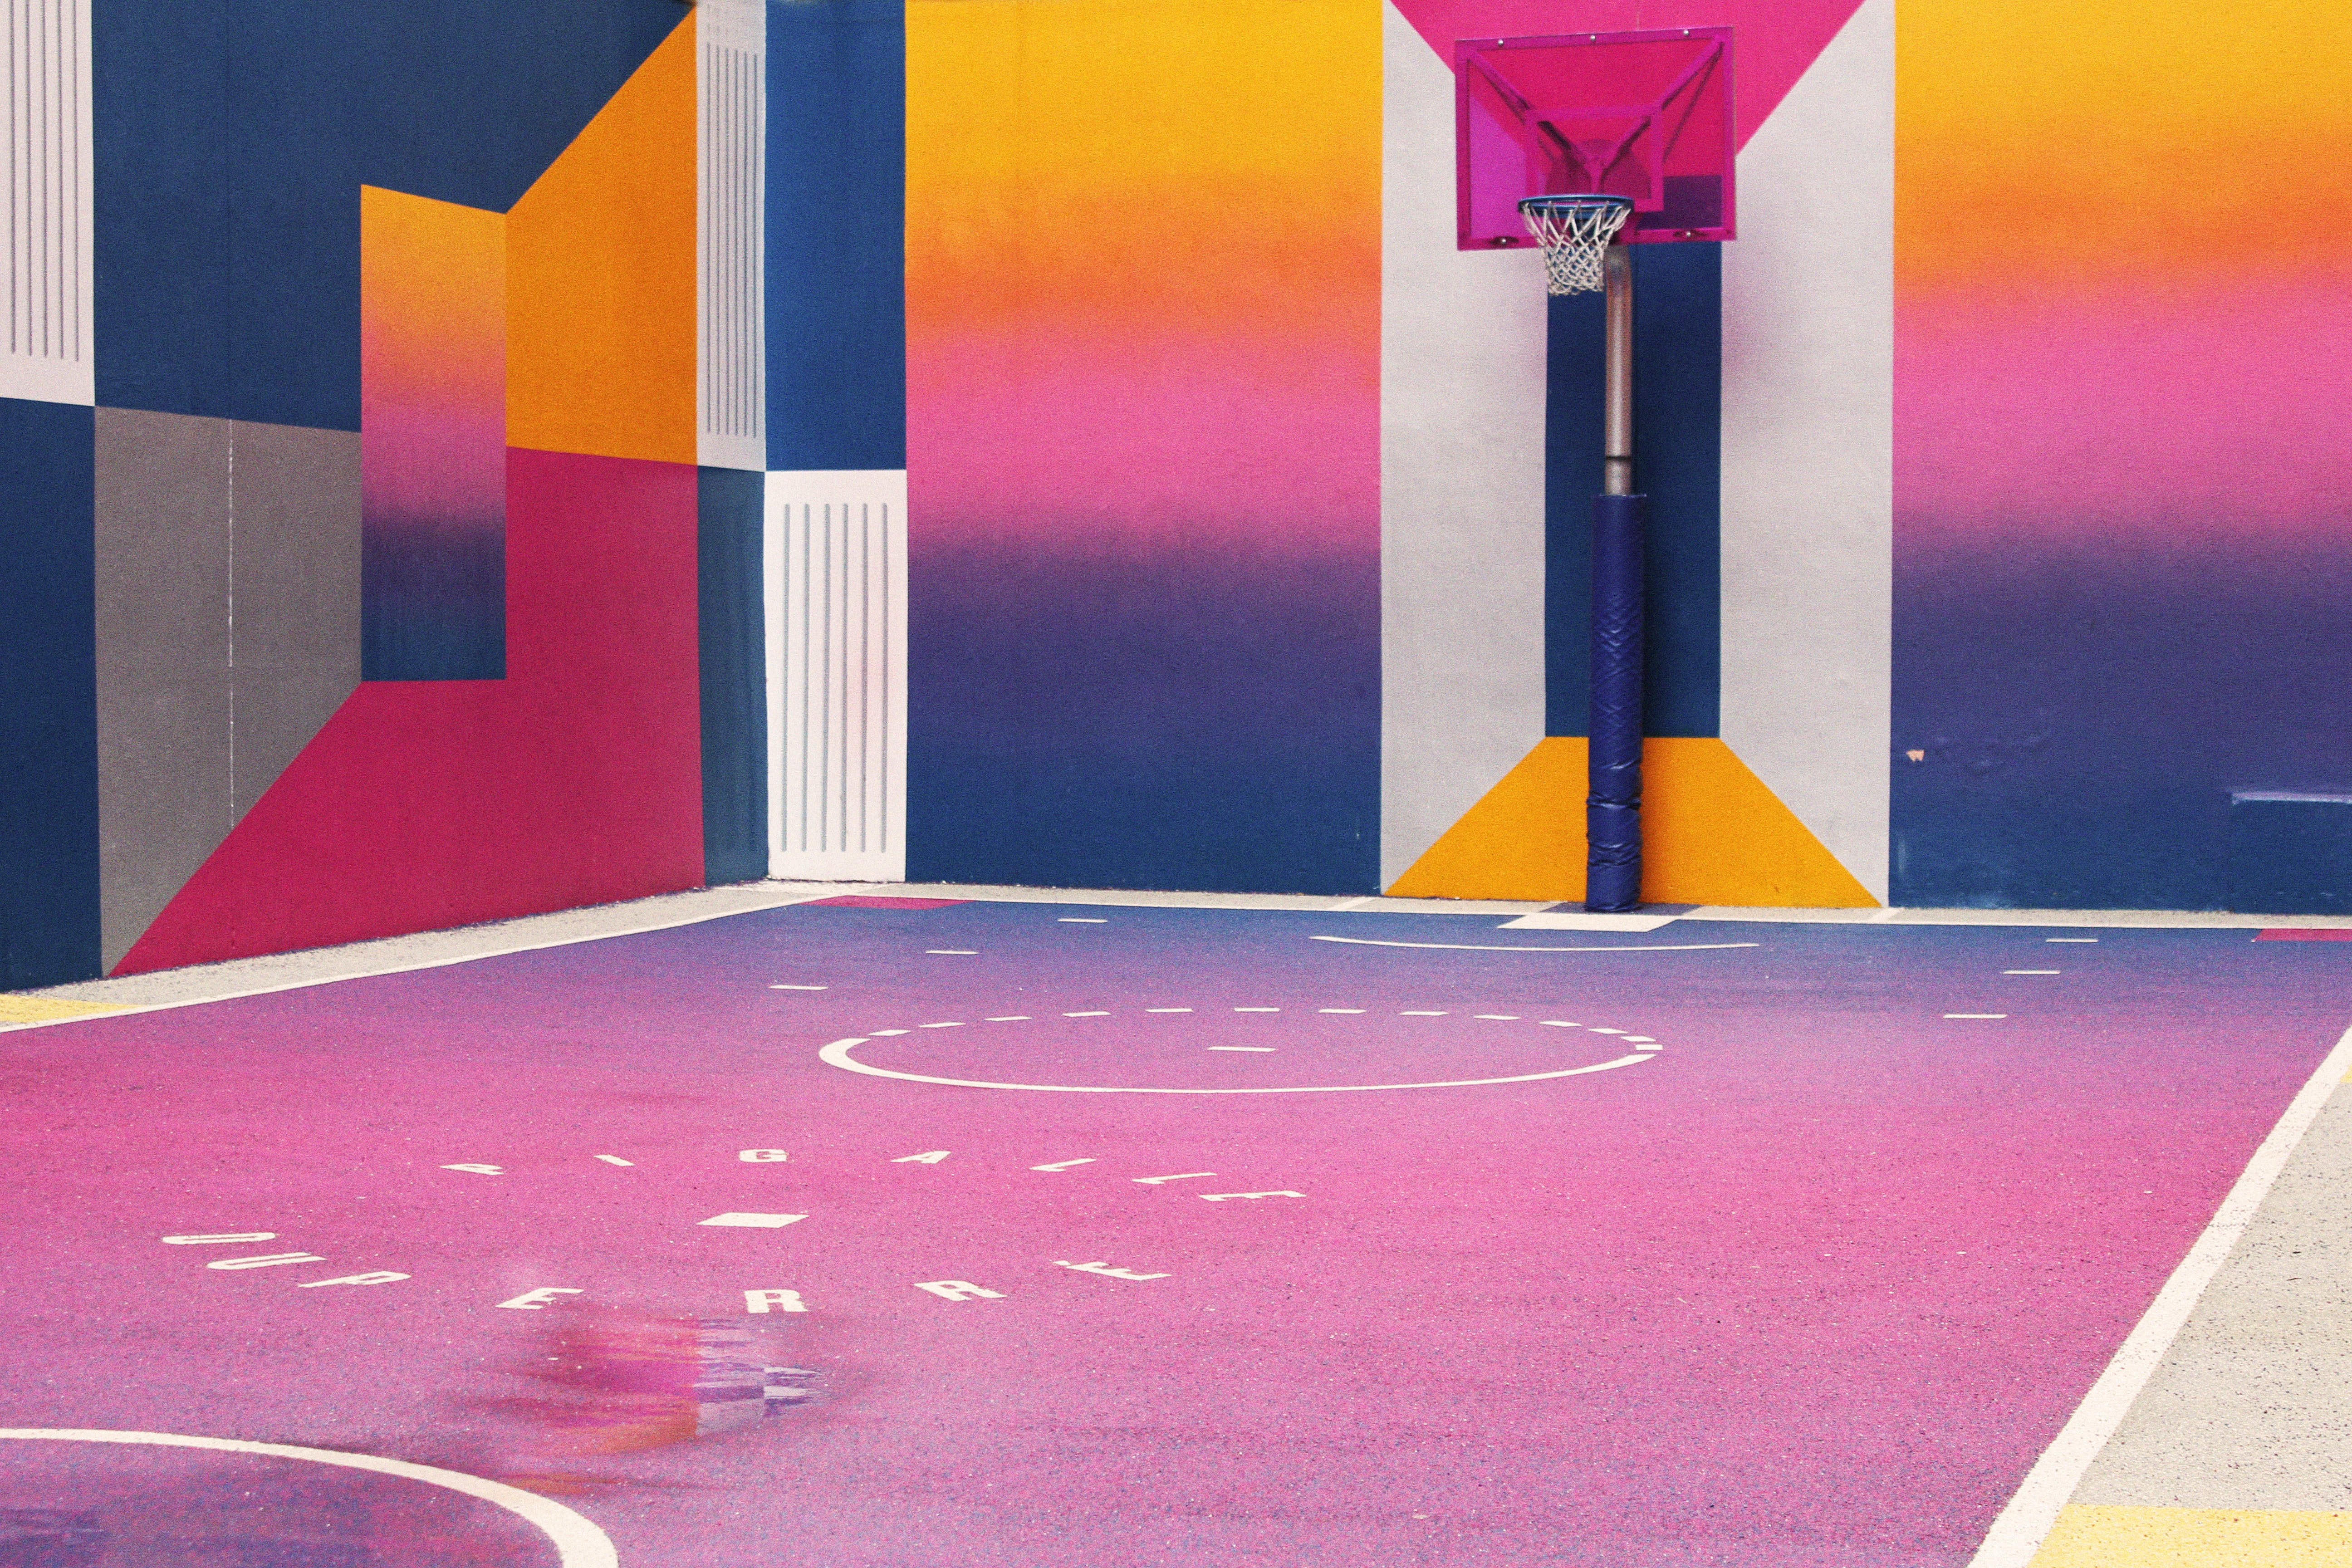 Colored basketball court by Santiago